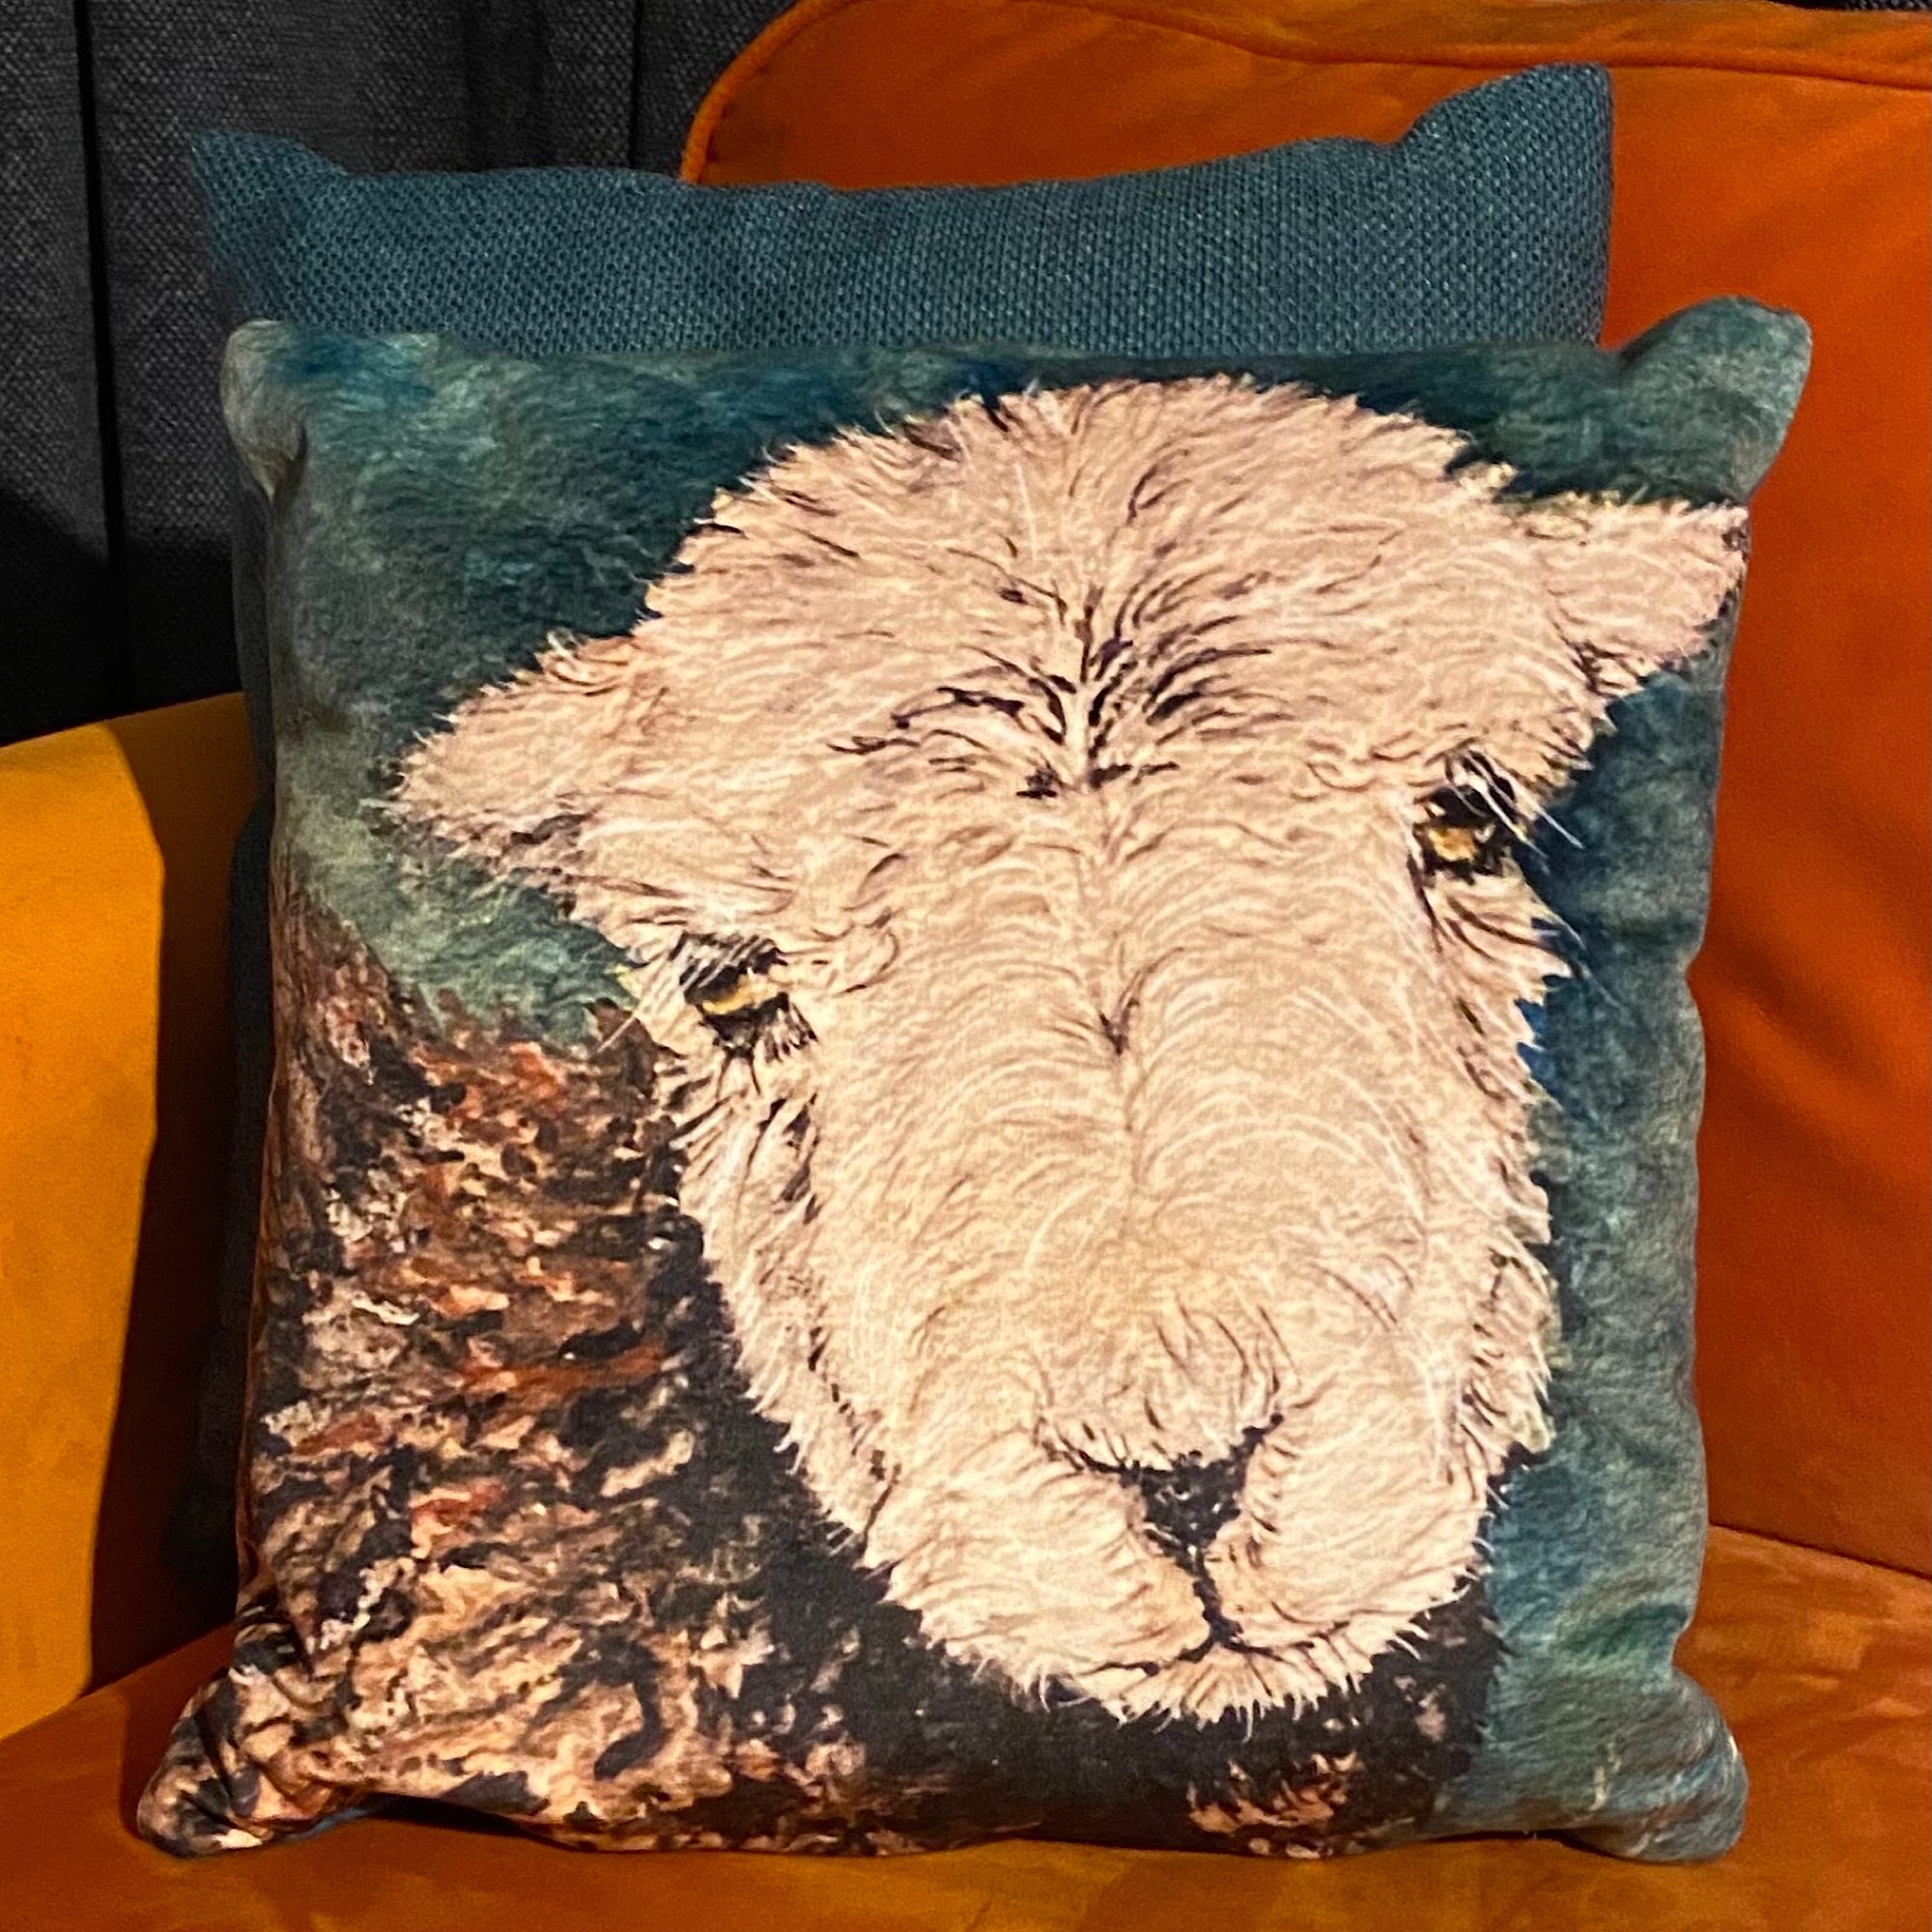 “Loch” is a cute Hardwick sheep on a soft velvet cushion. Teal coloured background to the portrait of the sheep